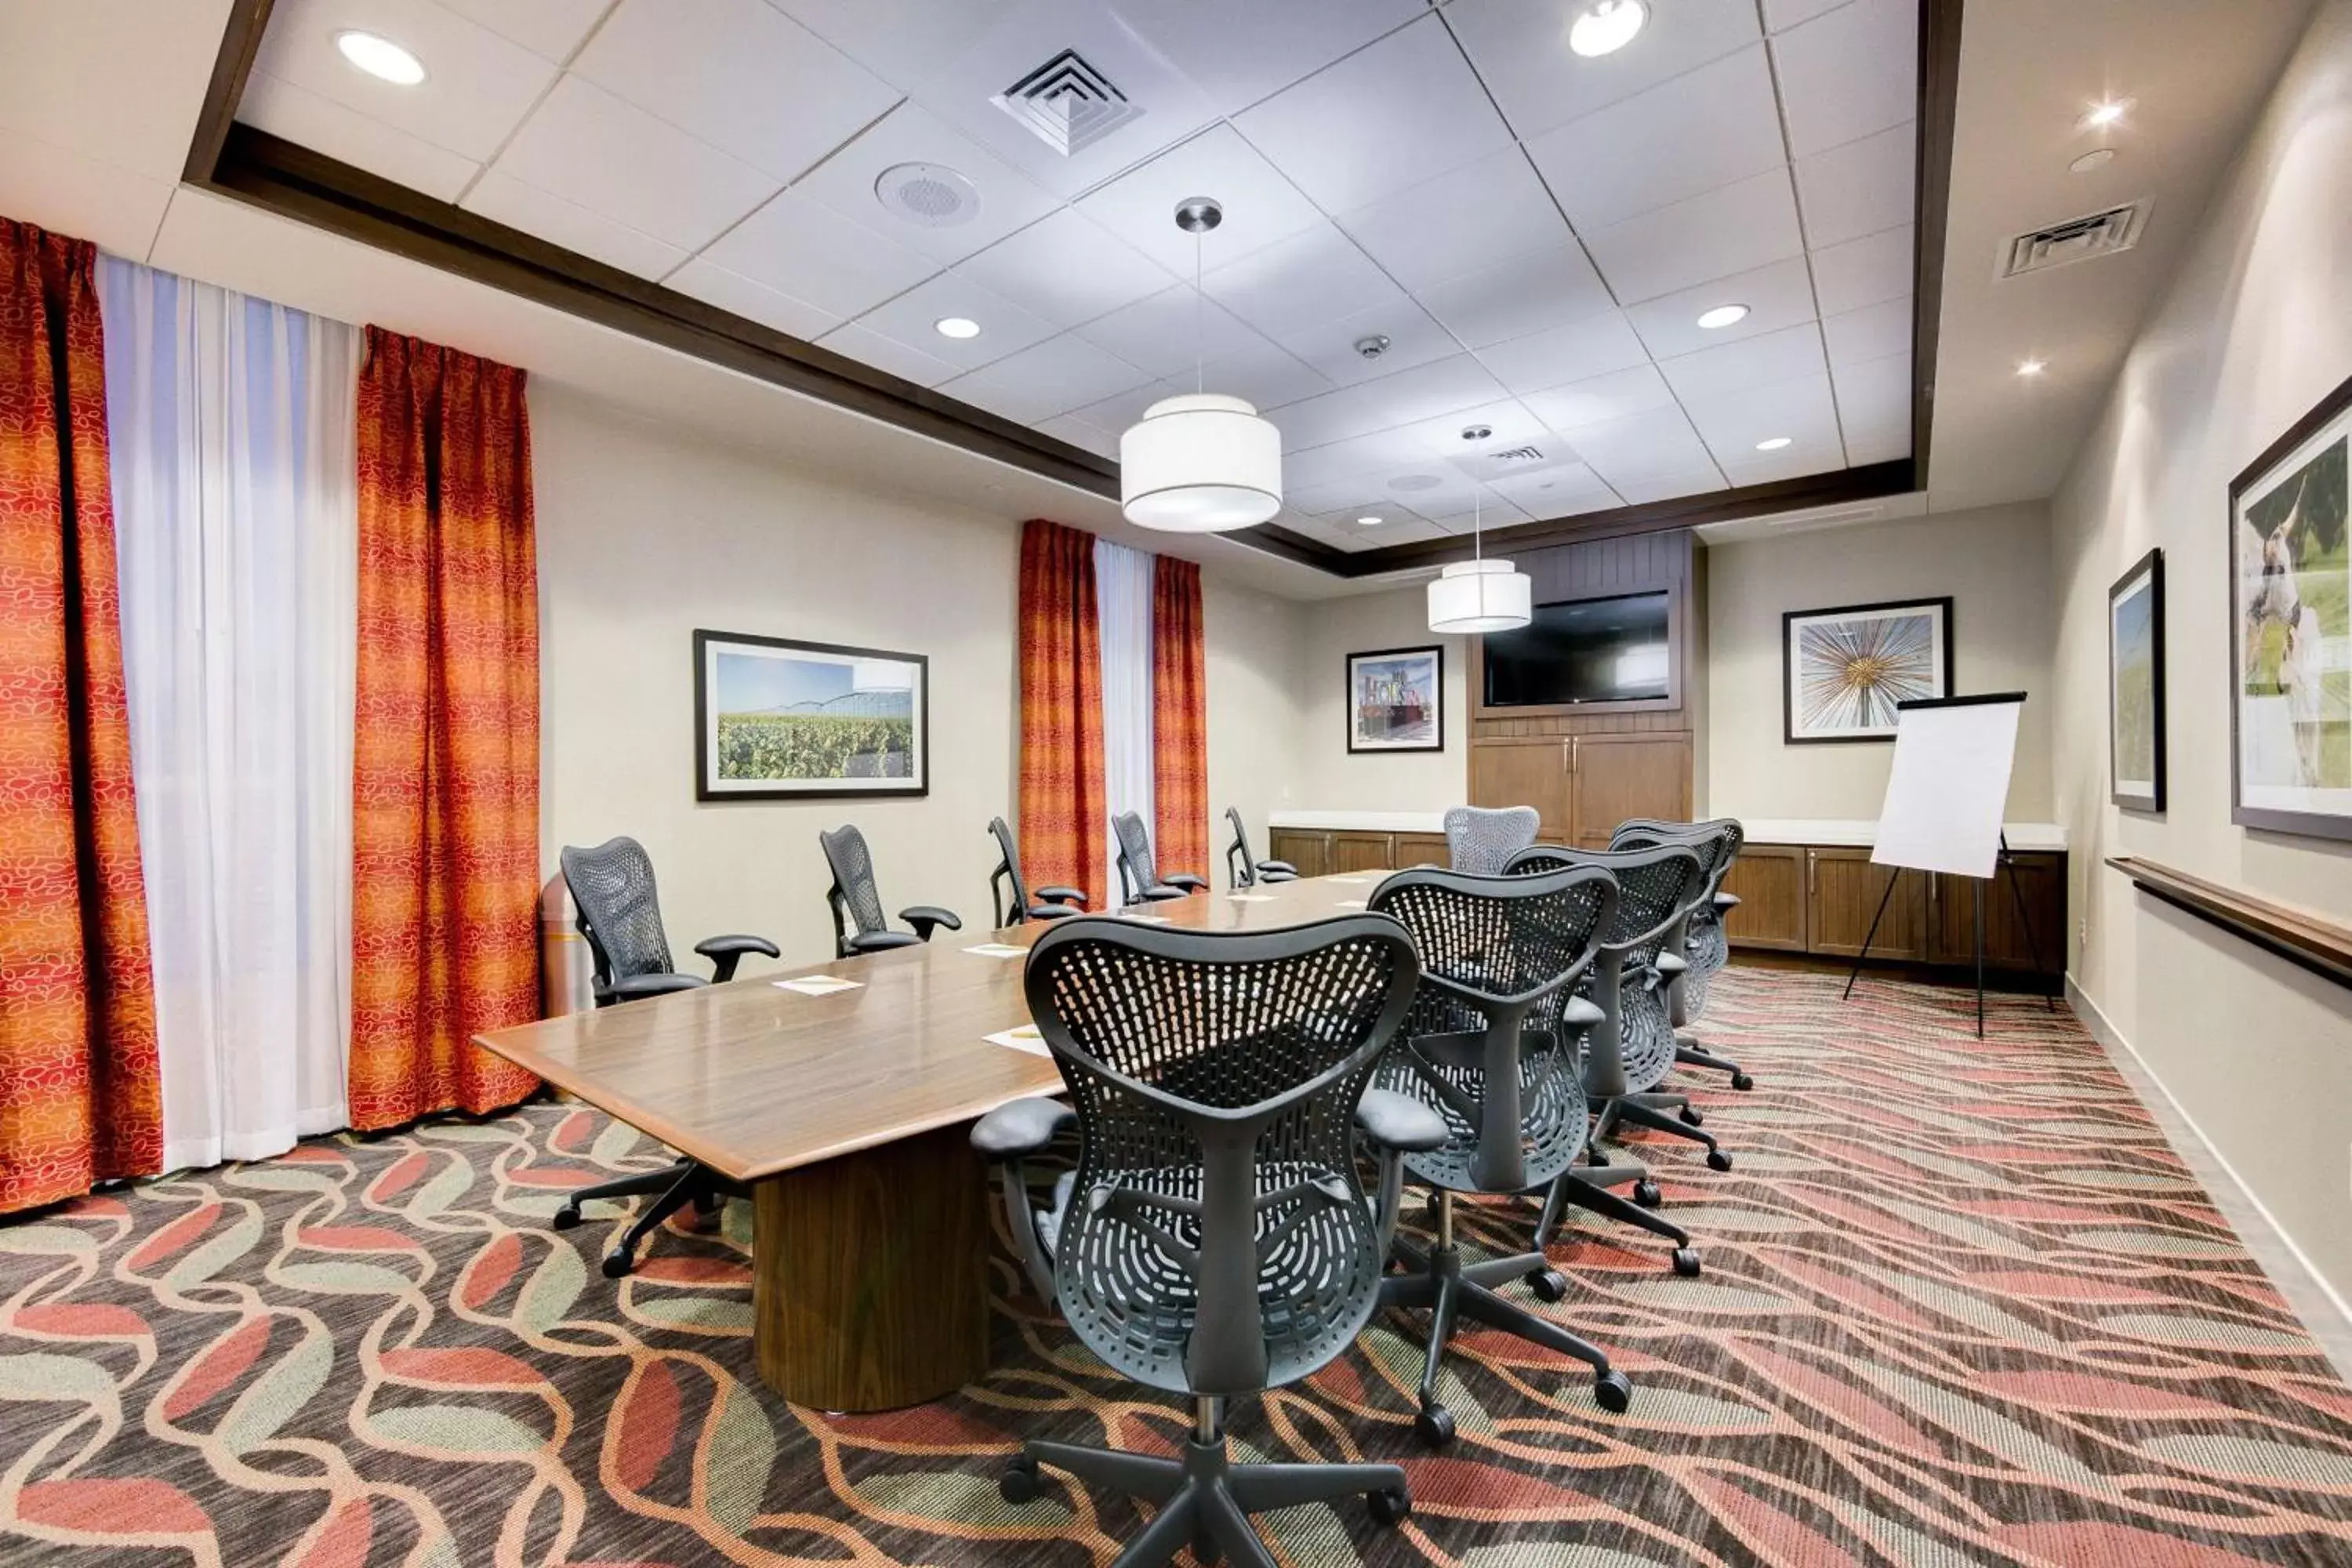 Meeting/conference room in Hilton Garden Inn North Houston Spring